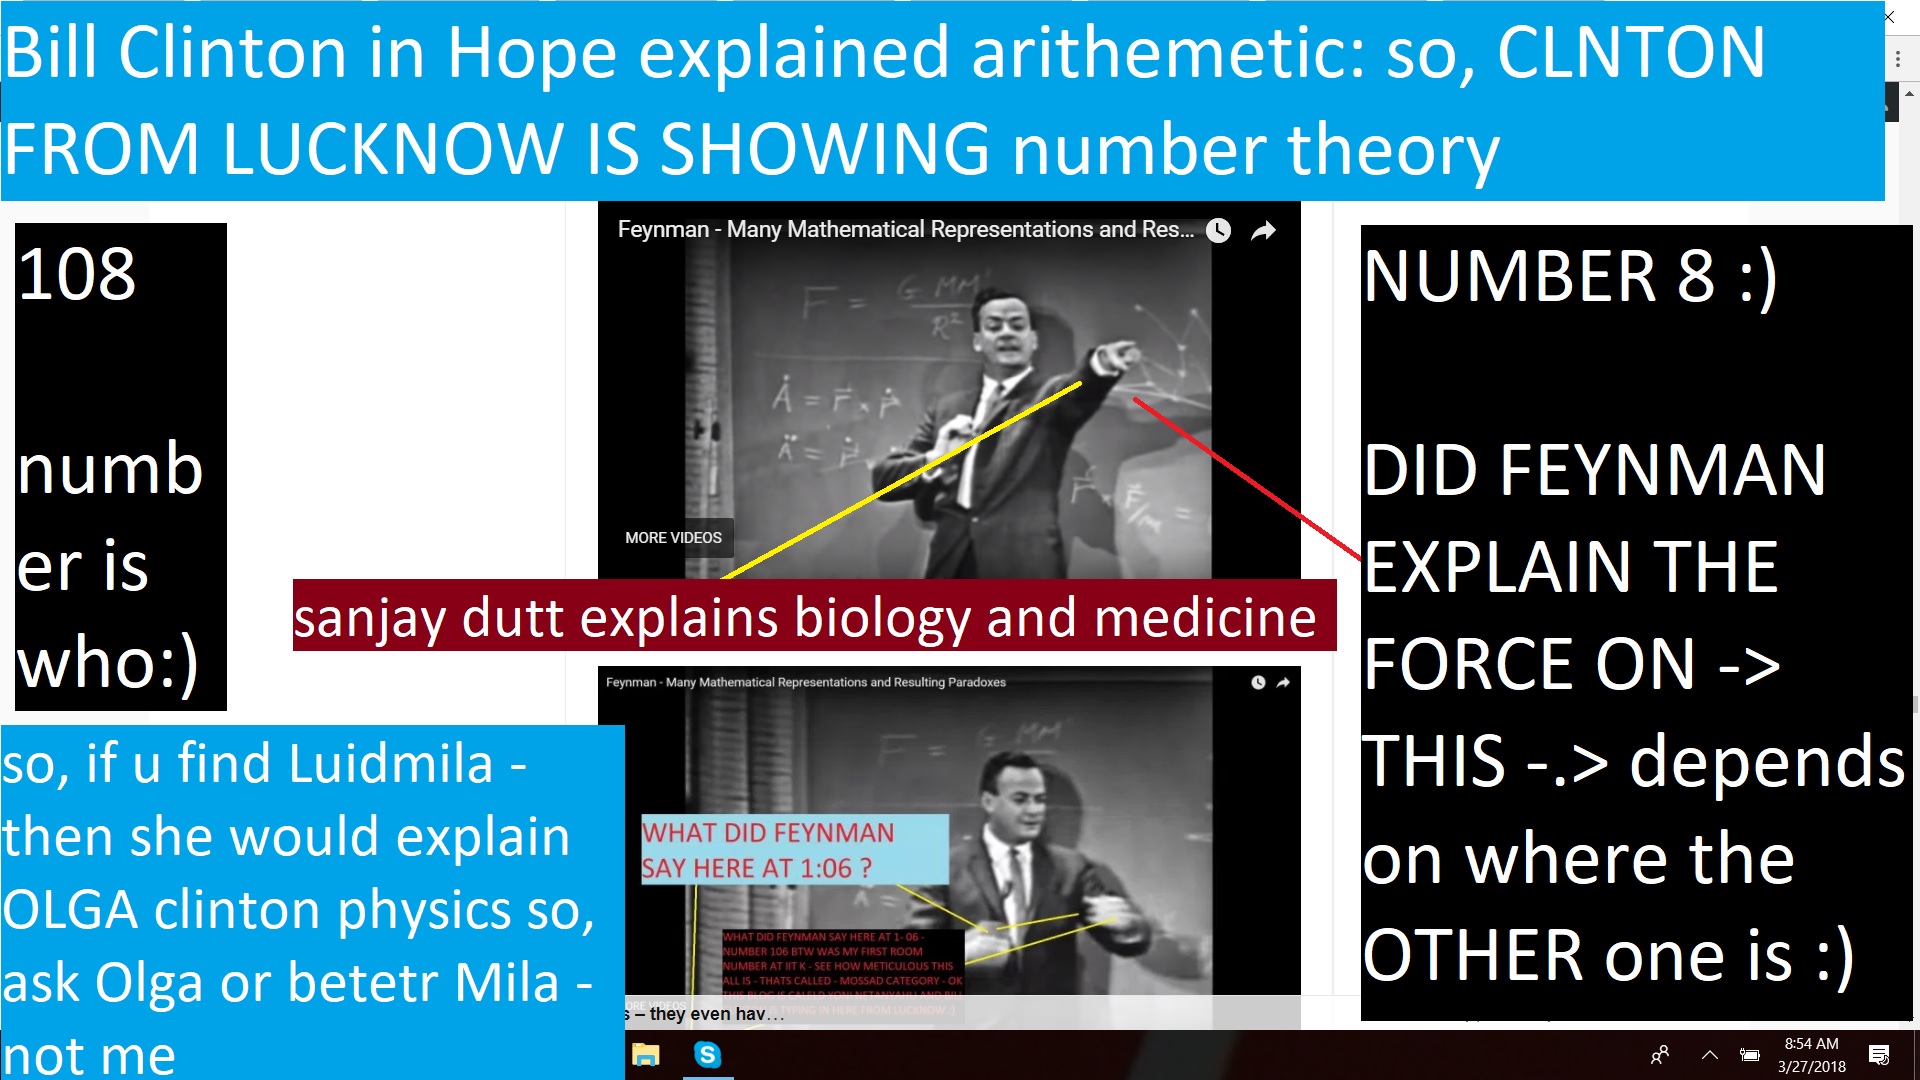 SHULMAN FEYNMAN DIAGRAMS - FOR NUMBER8 - MEAN HILALRY CLINTON - AND FOR SANJAY DUTT AND AJAY MISHRA - AND FIND MILA AND U GET NIRVANA IN ENGINEERING EVEN